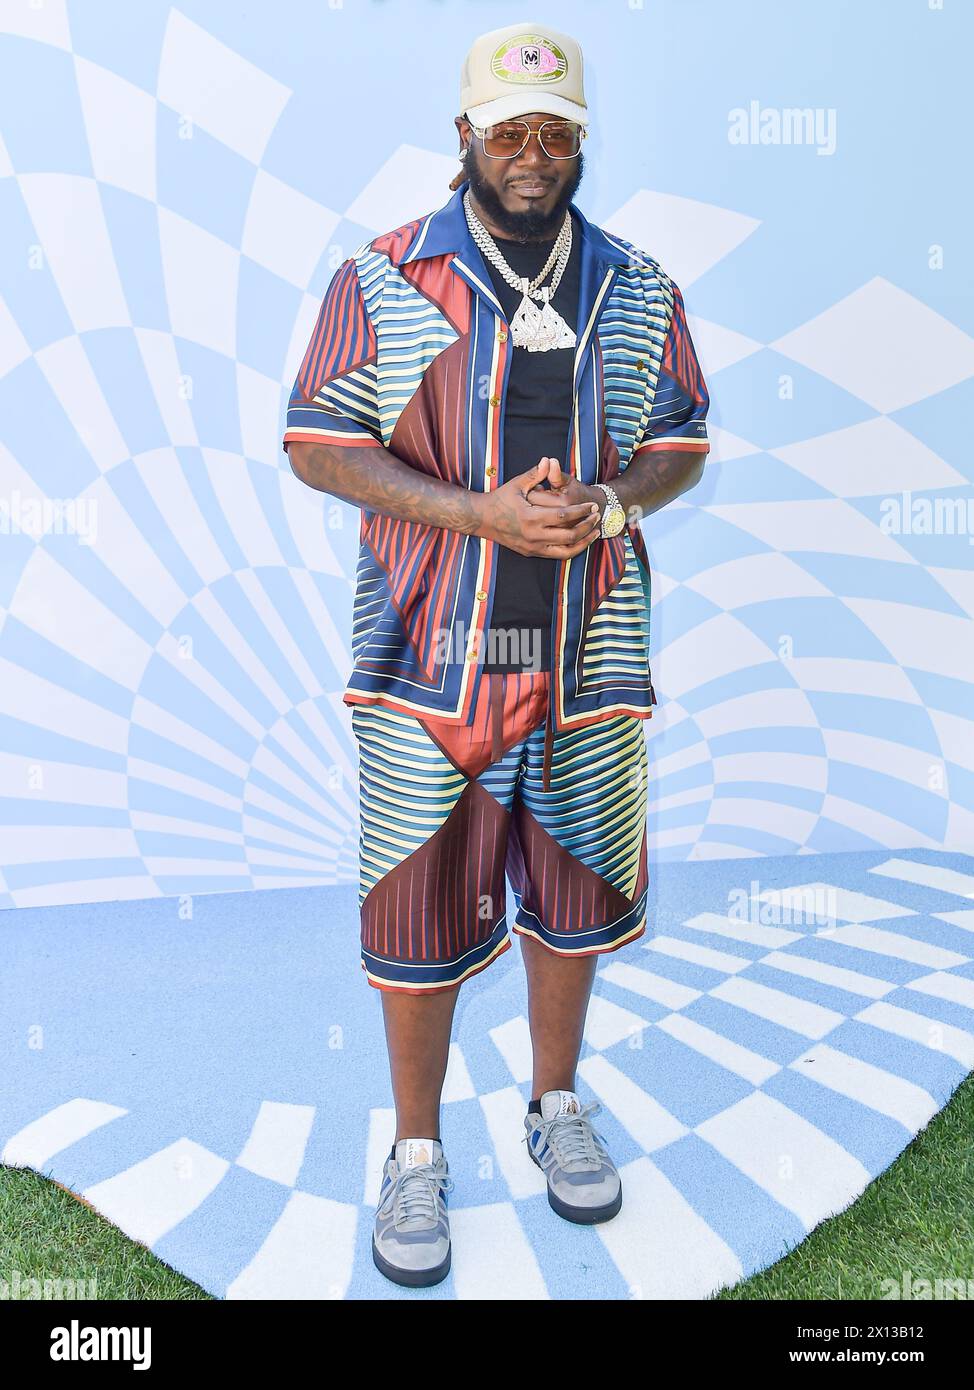 PALM SPRINGS, RIVERSIDE COUNTY, CALIFORNIA, USA - APRIL 13: T-Pain arrives at the 7th Annual REVOLVE Festival 2024 during the 2024 Coachella Valley Music And Arts Festival - Weekend 1 - Day 2 held at the Parker Palm Springs Hotel on April 13, 2024 in Palm Springs, Riverside County, California, United States. (Photo by Image Press Agency) Stock Photo